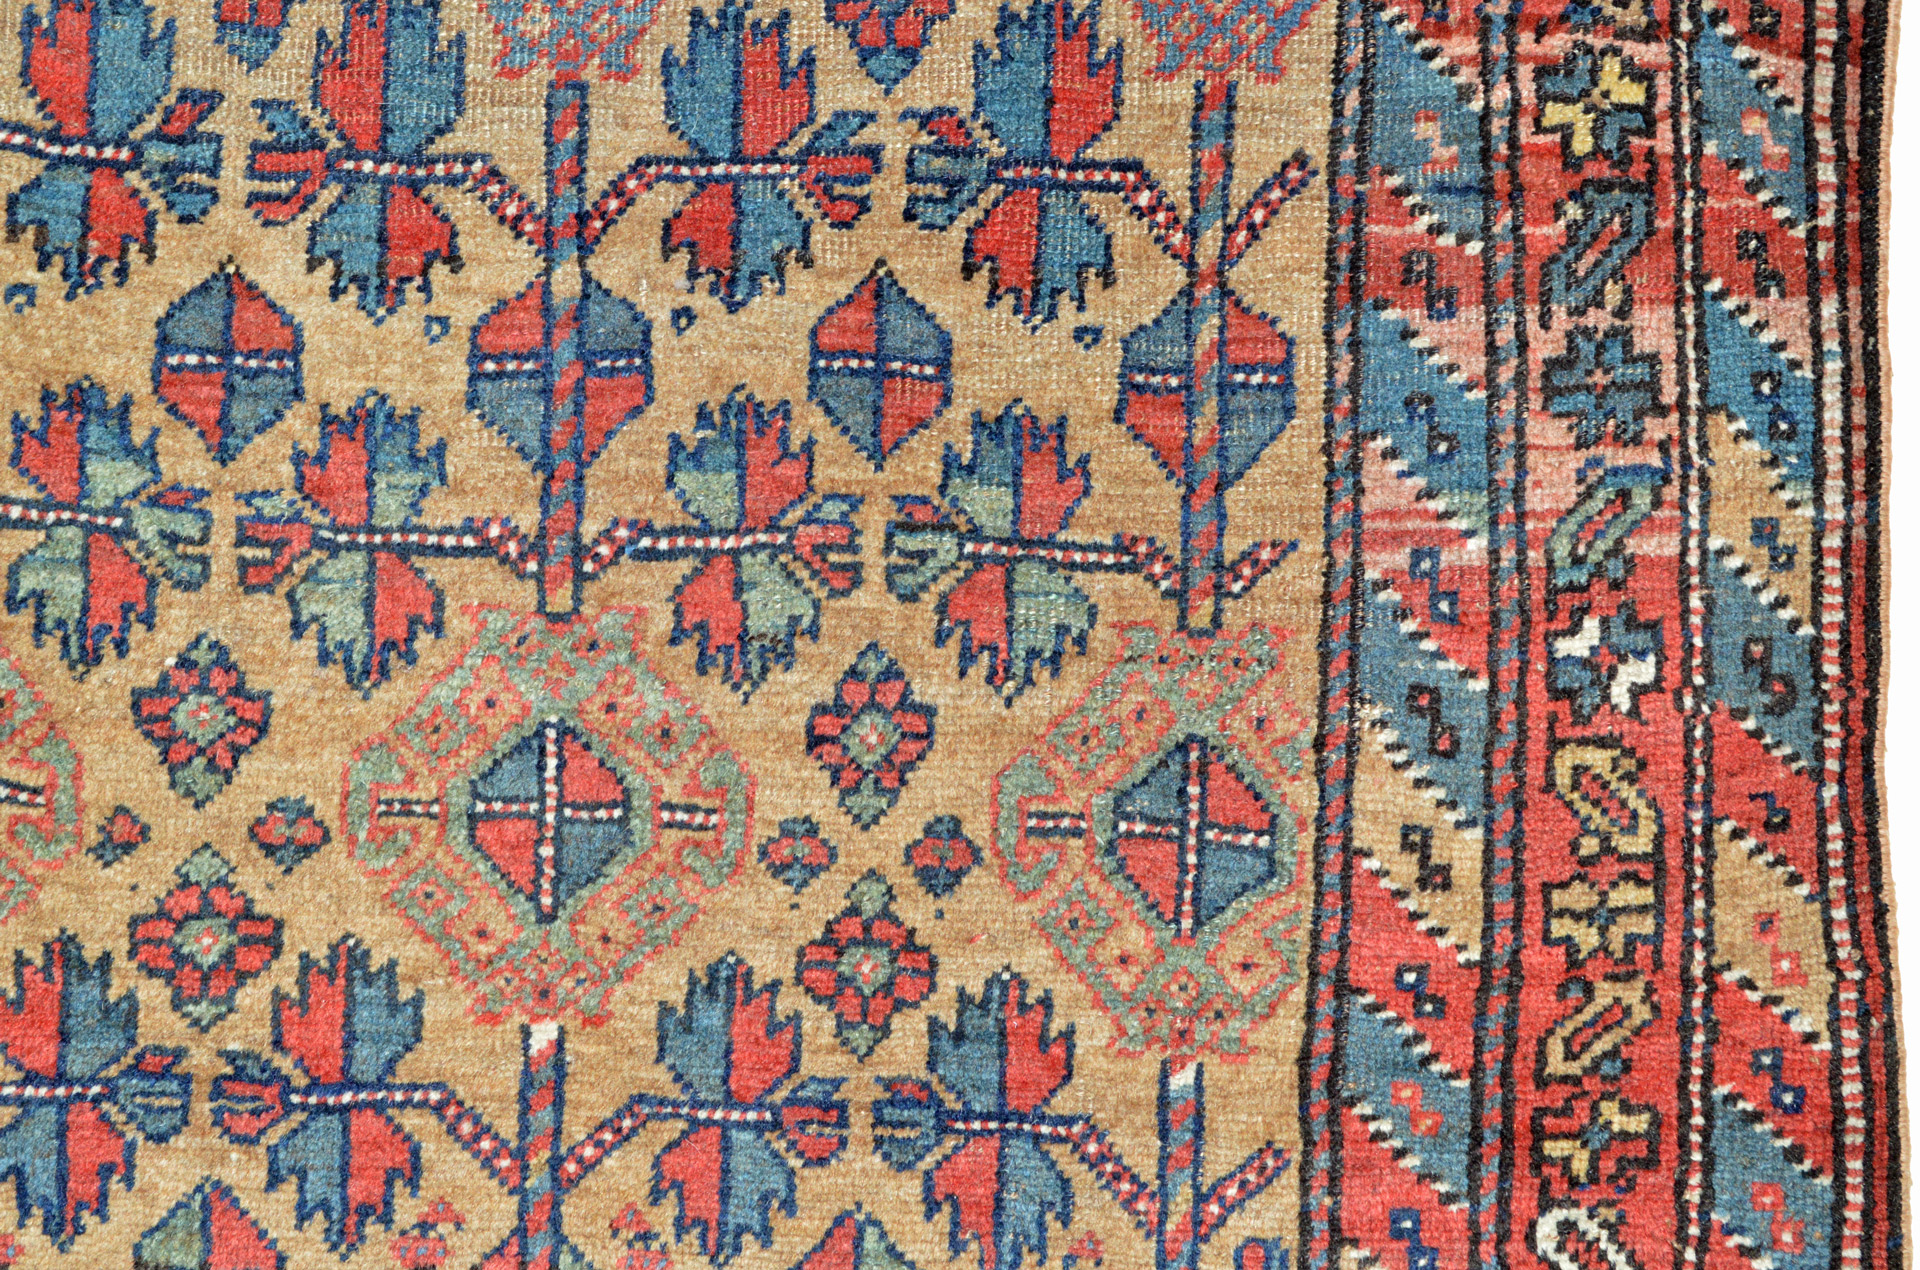 Detail of an antique northwest Persian Kurdish rug with stylized leaves and flowers on a camel color field, circa 1900 - Douglas Stock Gallery, antique tribal rugs Boston,MA area New England, antique tribal rugs New York by appointment